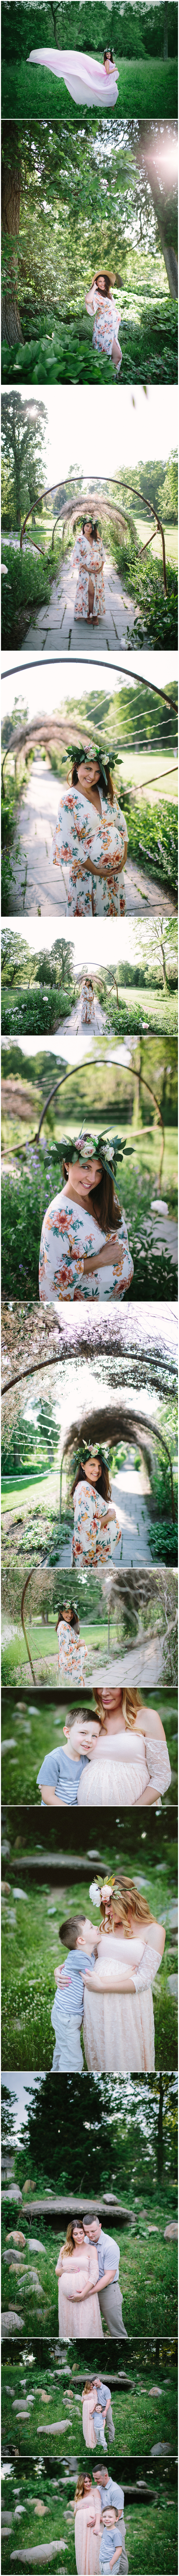 Stylized Maternity Photography | Chicago Photographer | Patricia Anderson Photography